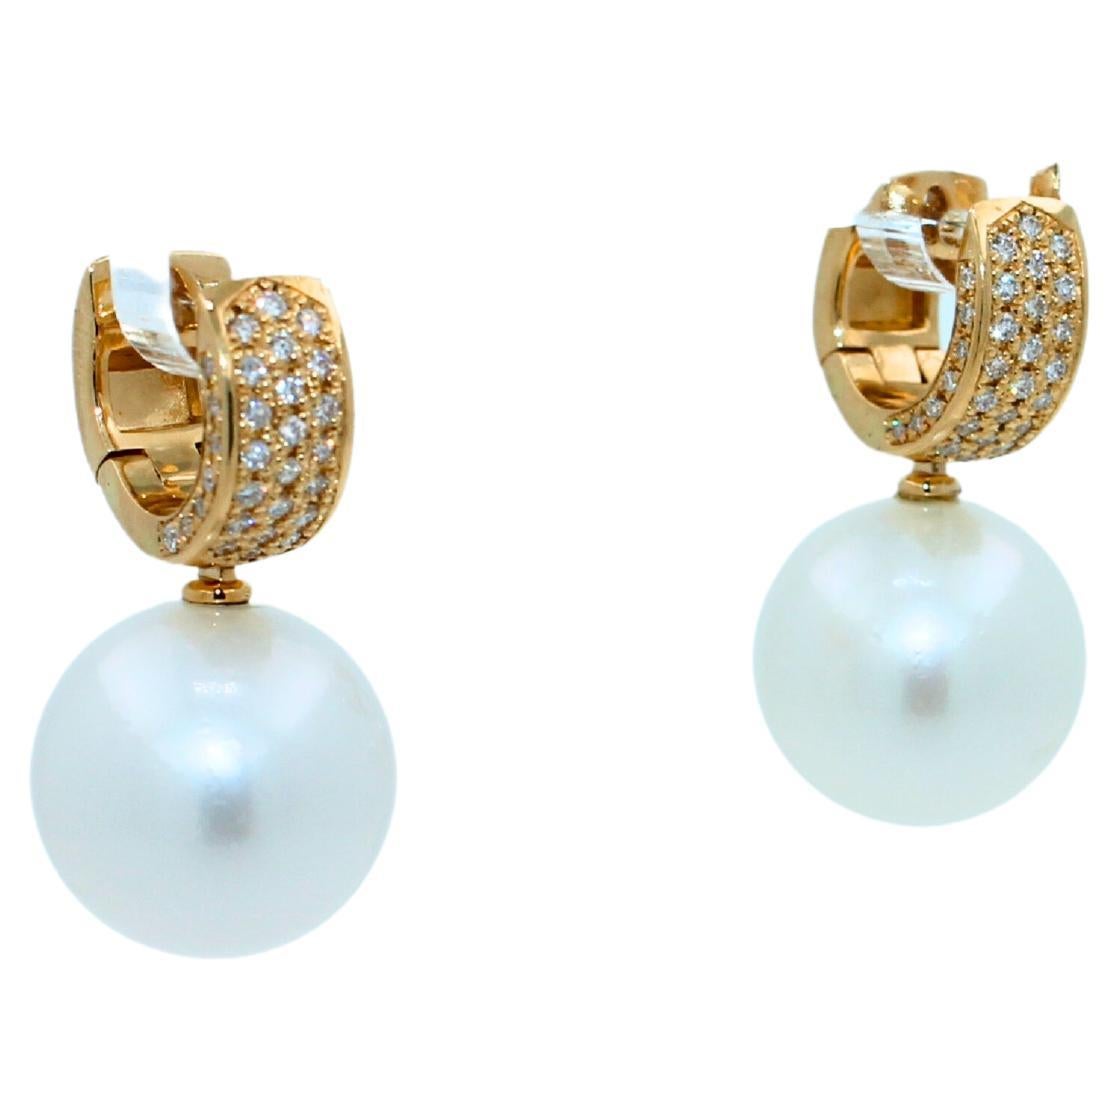 White AAA Quality South Sea Pearls
Striking Silvery Hue with Light Blue Iridescent  Tones
Very Reflective Surface - Almost Mirror-Like 
Full Classic Sphere Shapes
15 MM Diameter Size
18.4 Grams Total Weight
0.70 cts Diamonds VVS Quality
2.75 CM Full